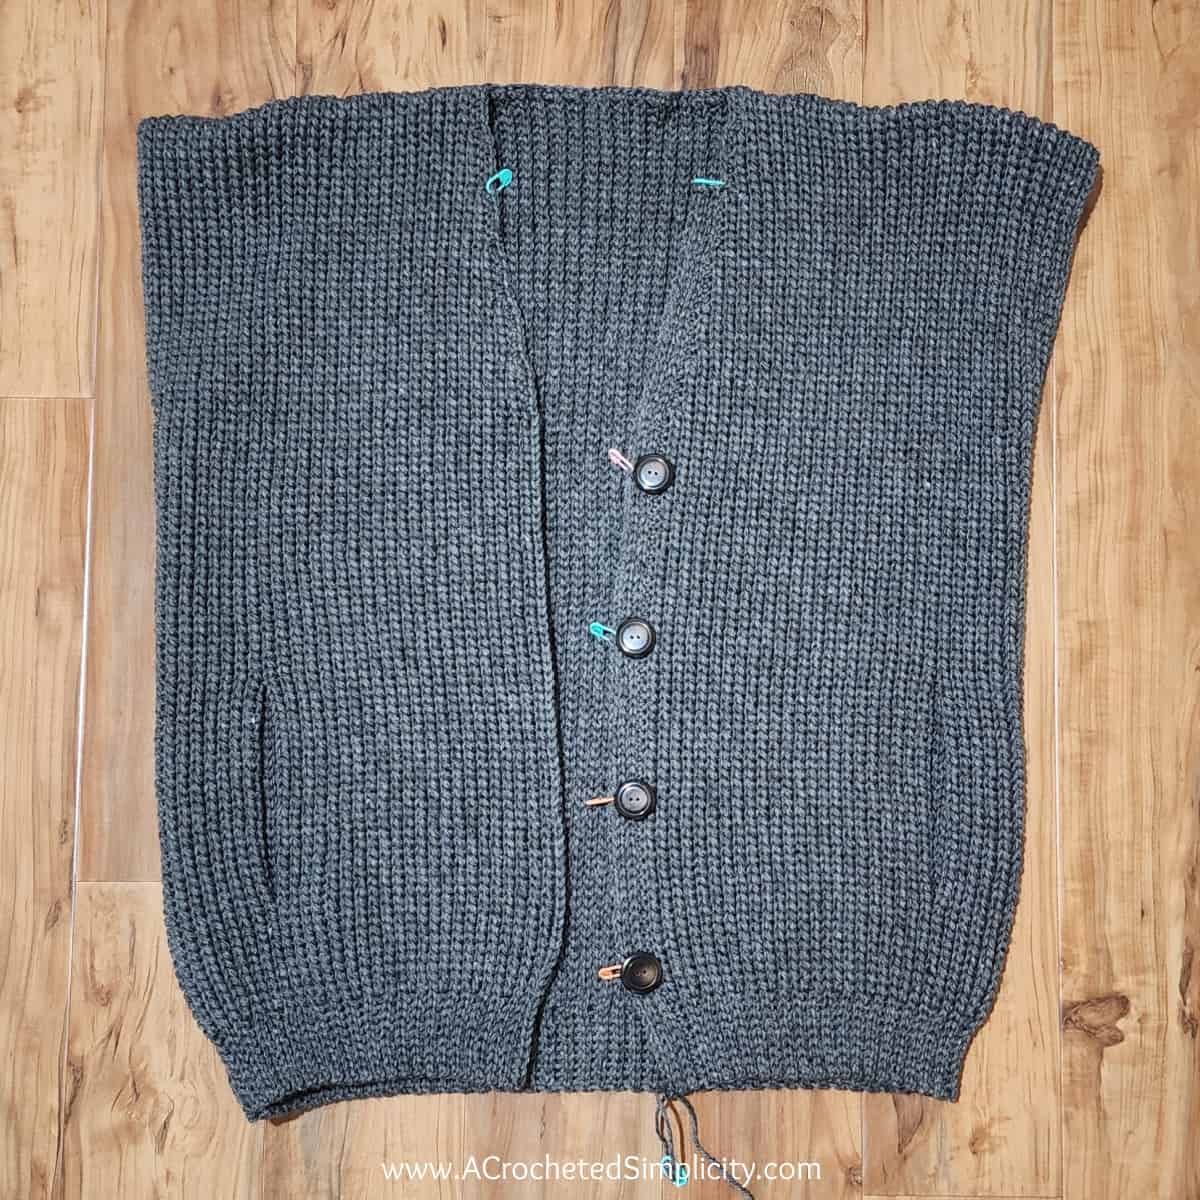 Photo shows placing buttons on mens sweater